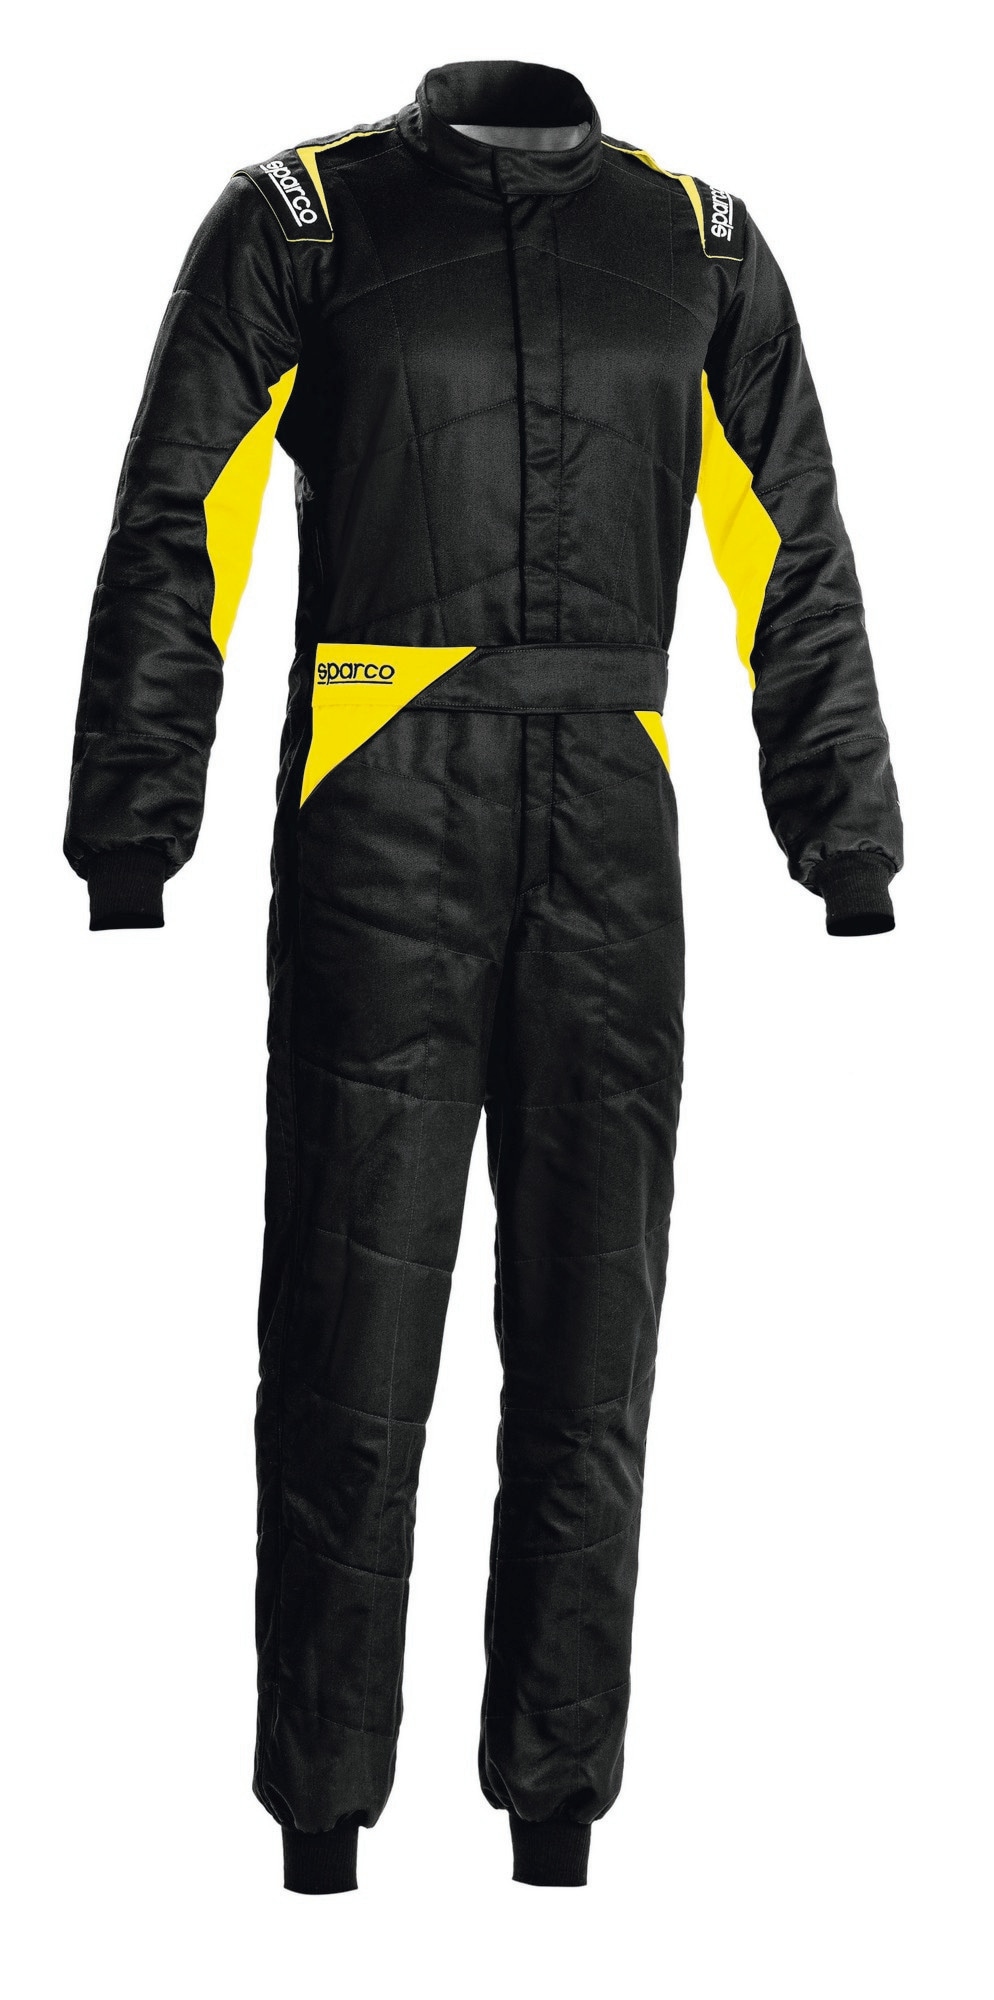 Racing Suit Sparco Sprint R566 Black/Yellow